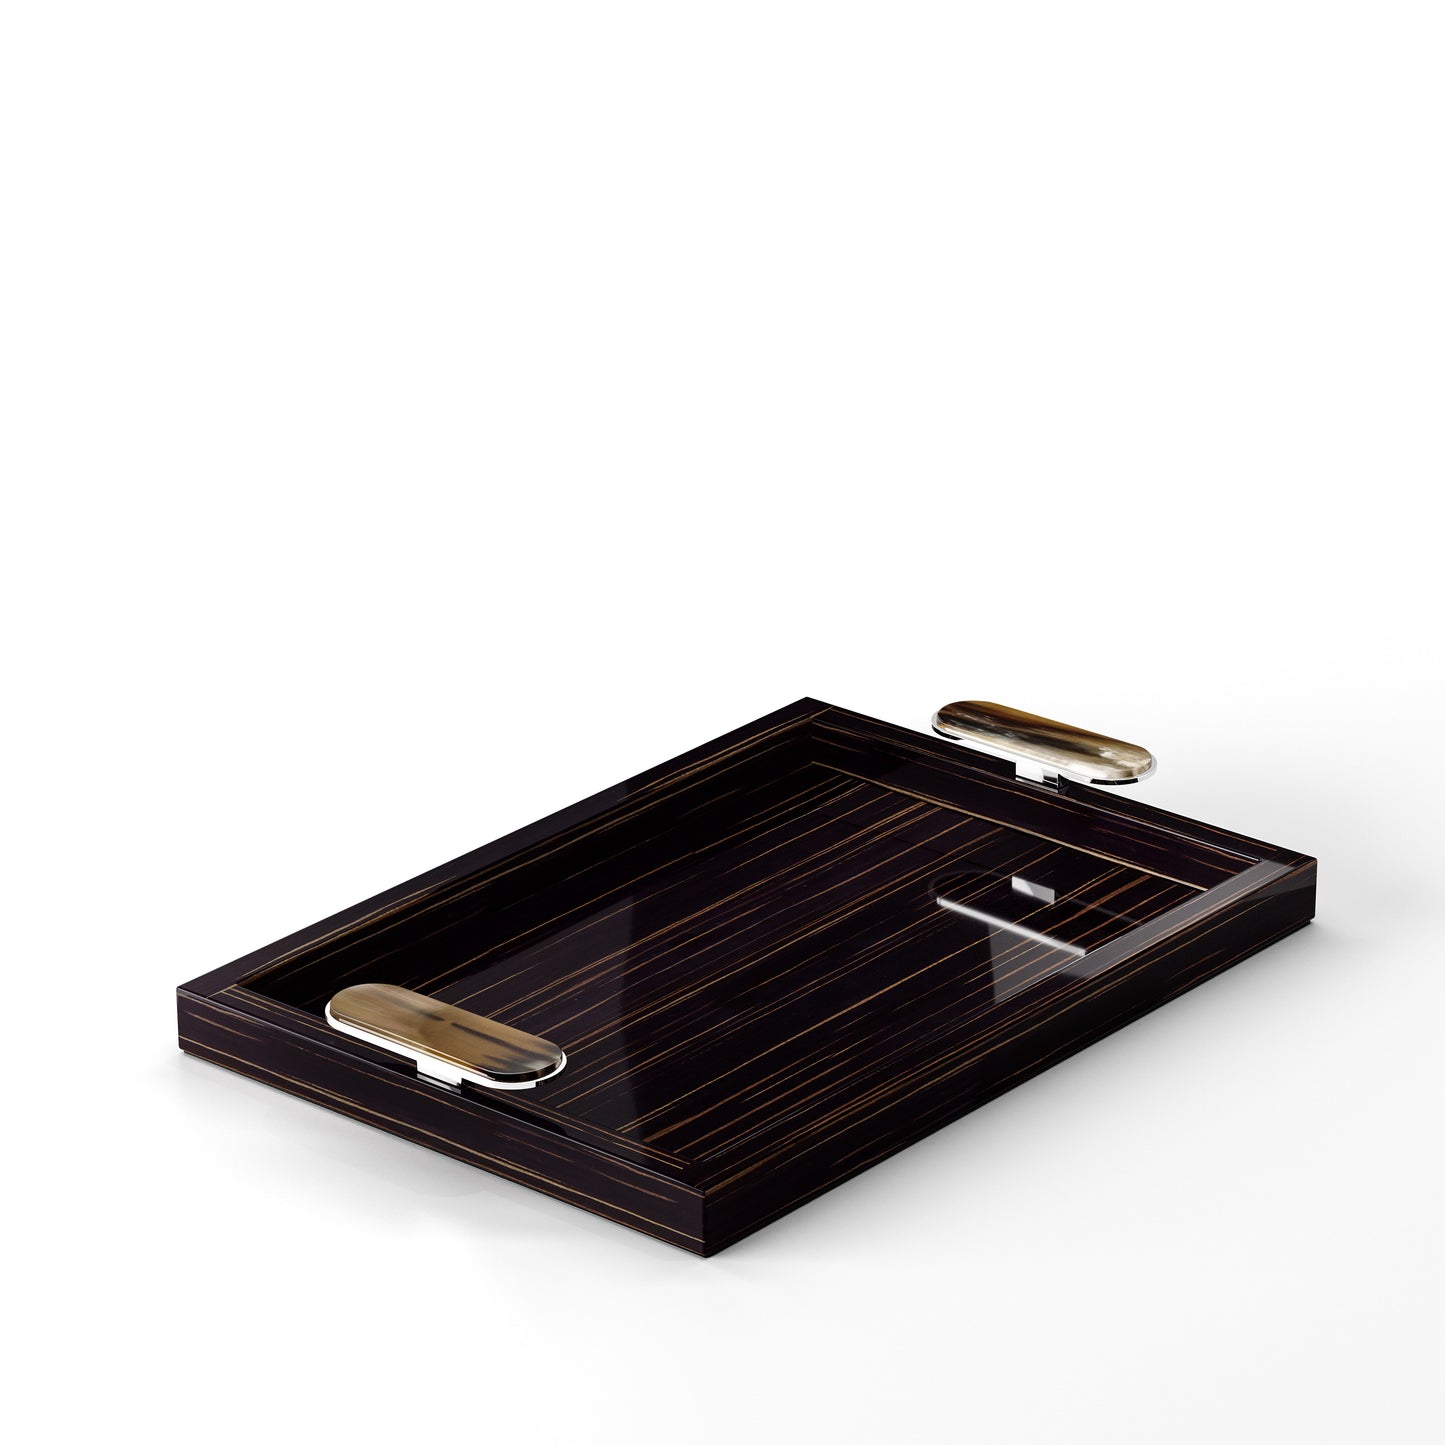 Arcahorn Berro Tray | Glossy Ebony Finish | Handles in Horn and Chromed Brass | Elegant Serving Solution | Perfect for Yacht Decor | Explore a Range of Luxury Home Accessories at 2Jour Concierge, #1 luxury high-end gift & lifestyle shop